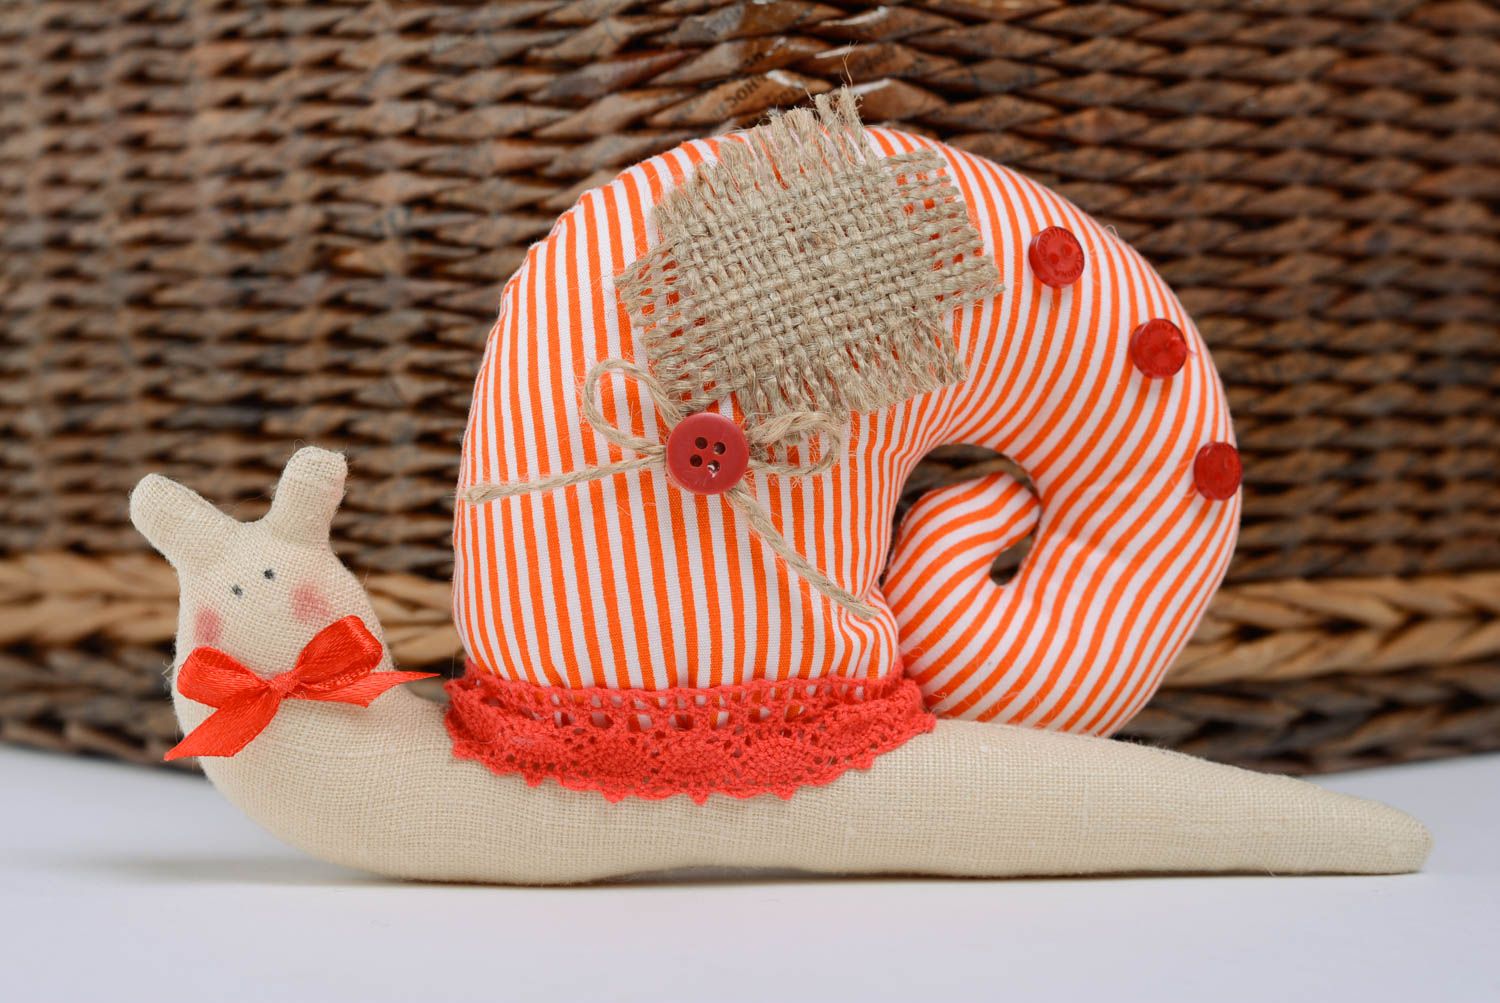 Soft snail toy made of cotton and holofiber red striped toy for home decor photo 5